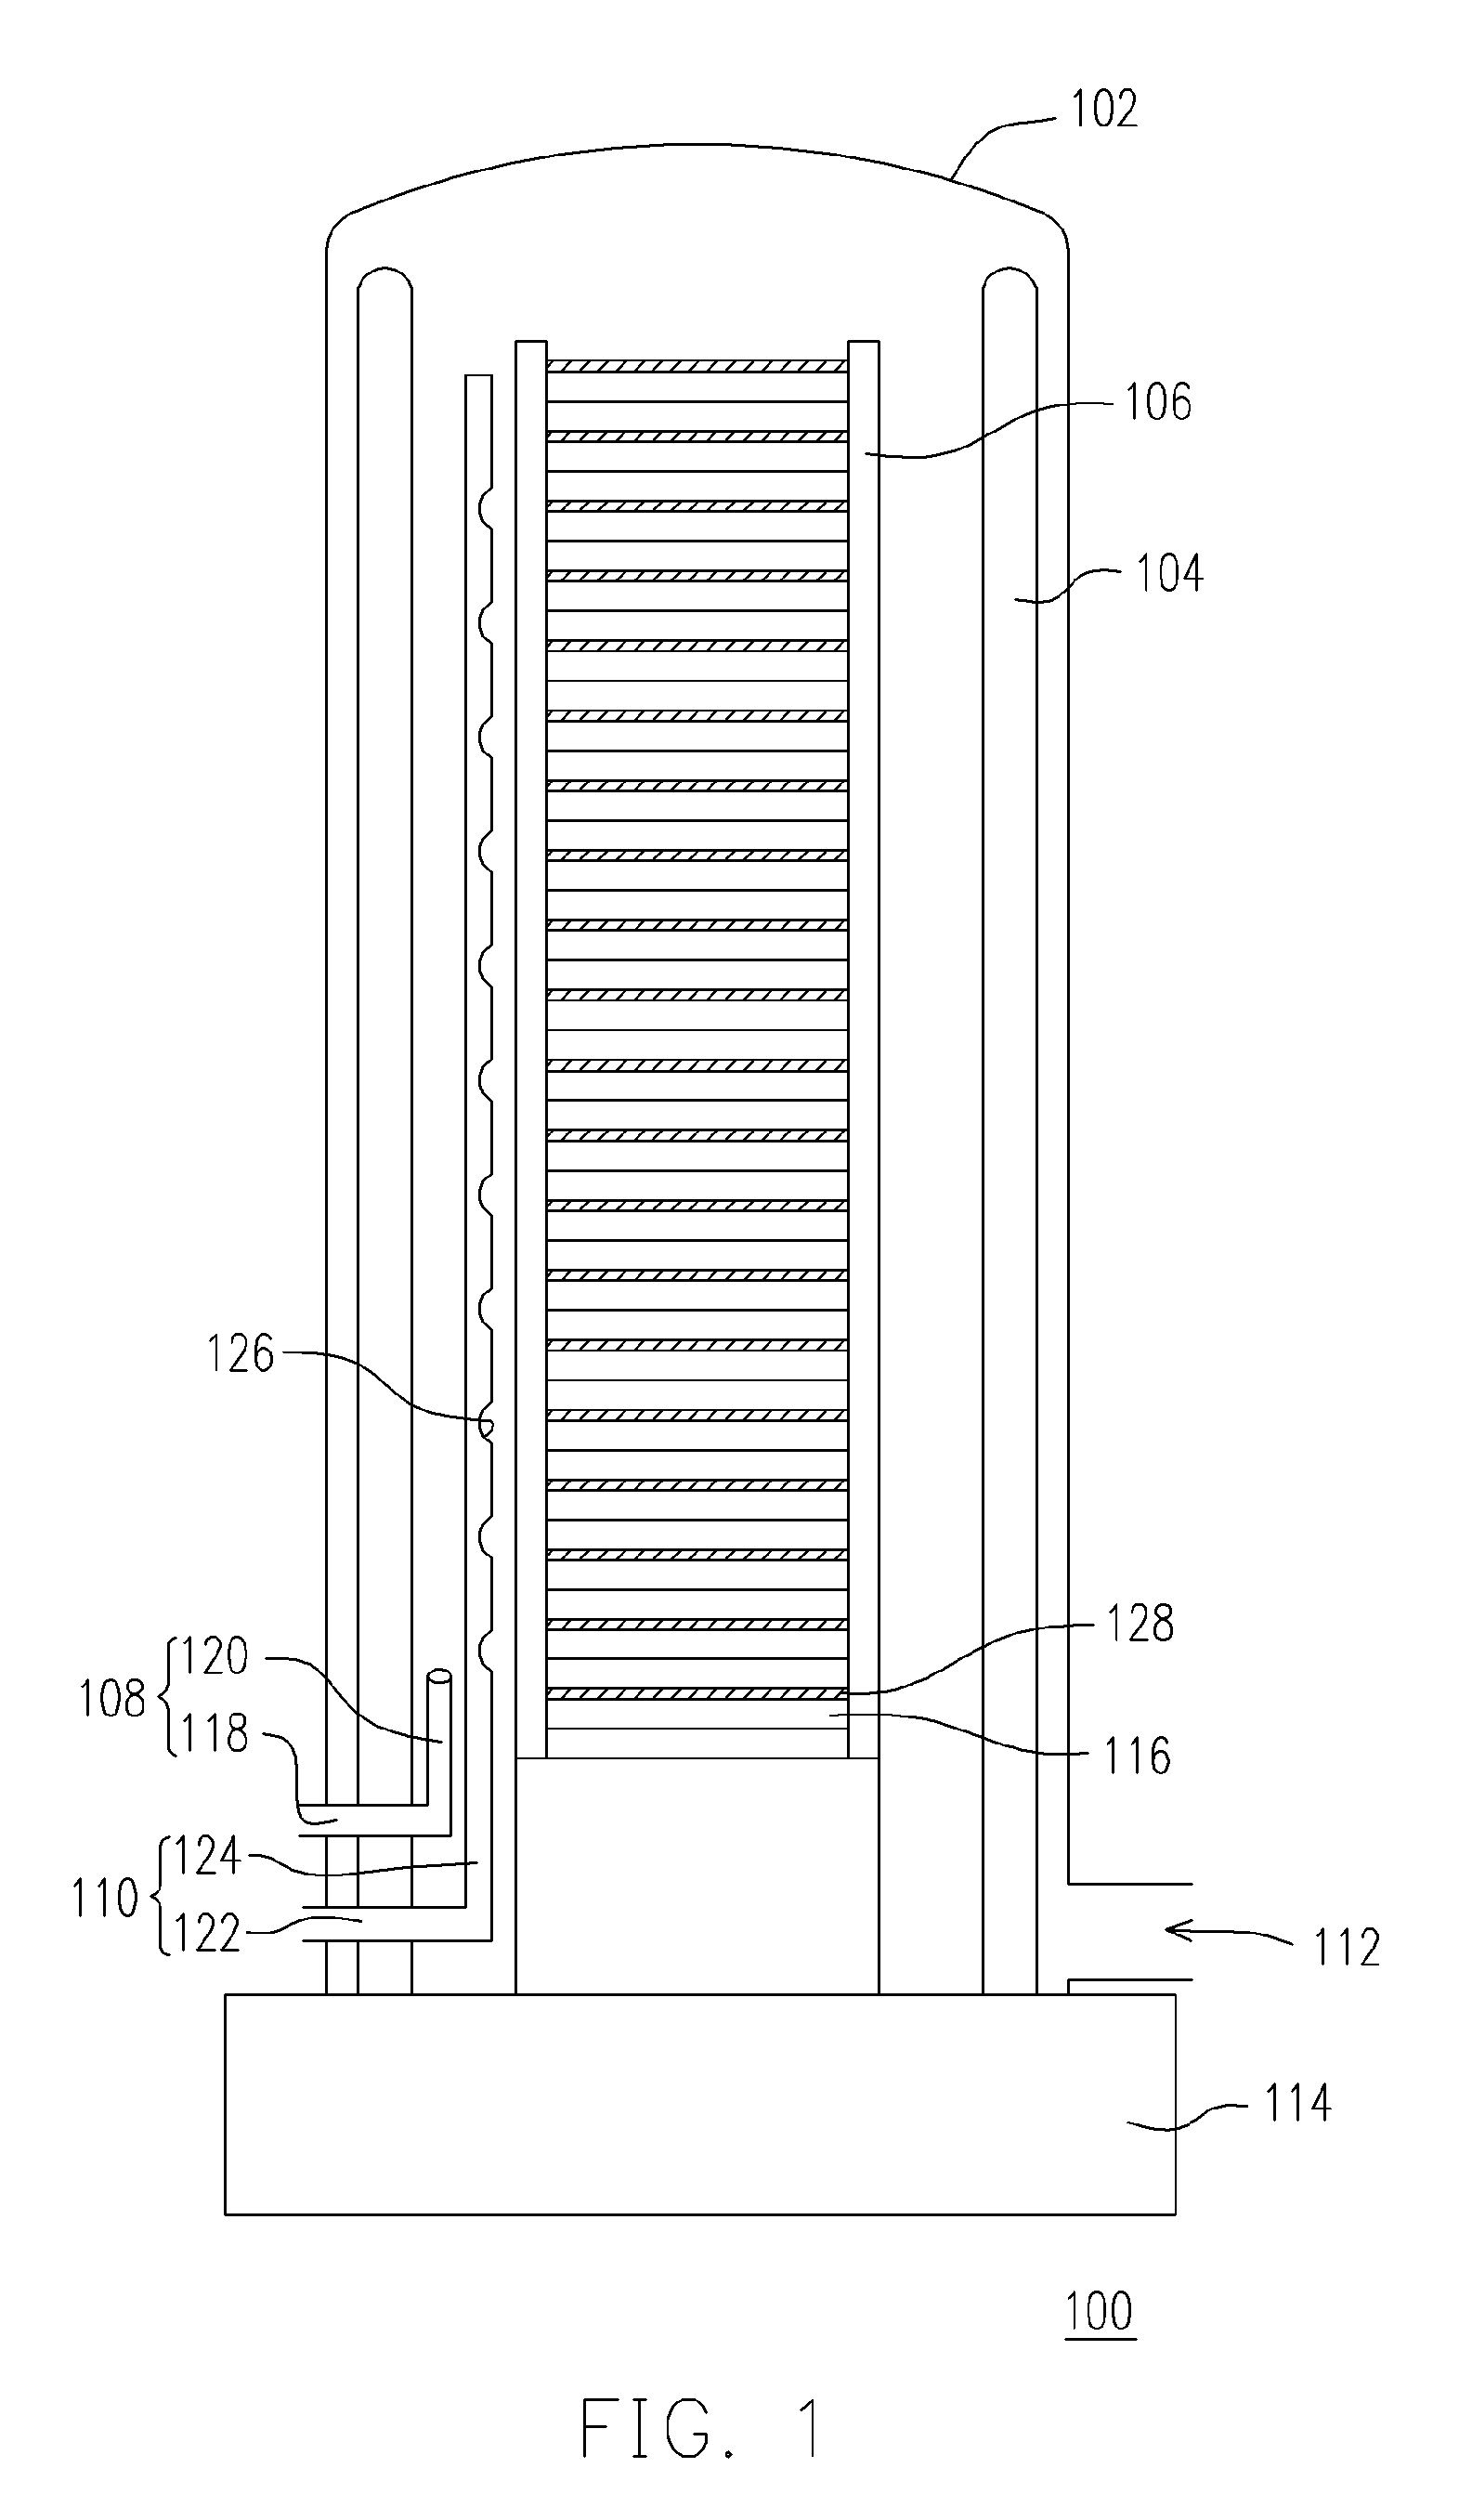 Method of forming a silicon nitride layer